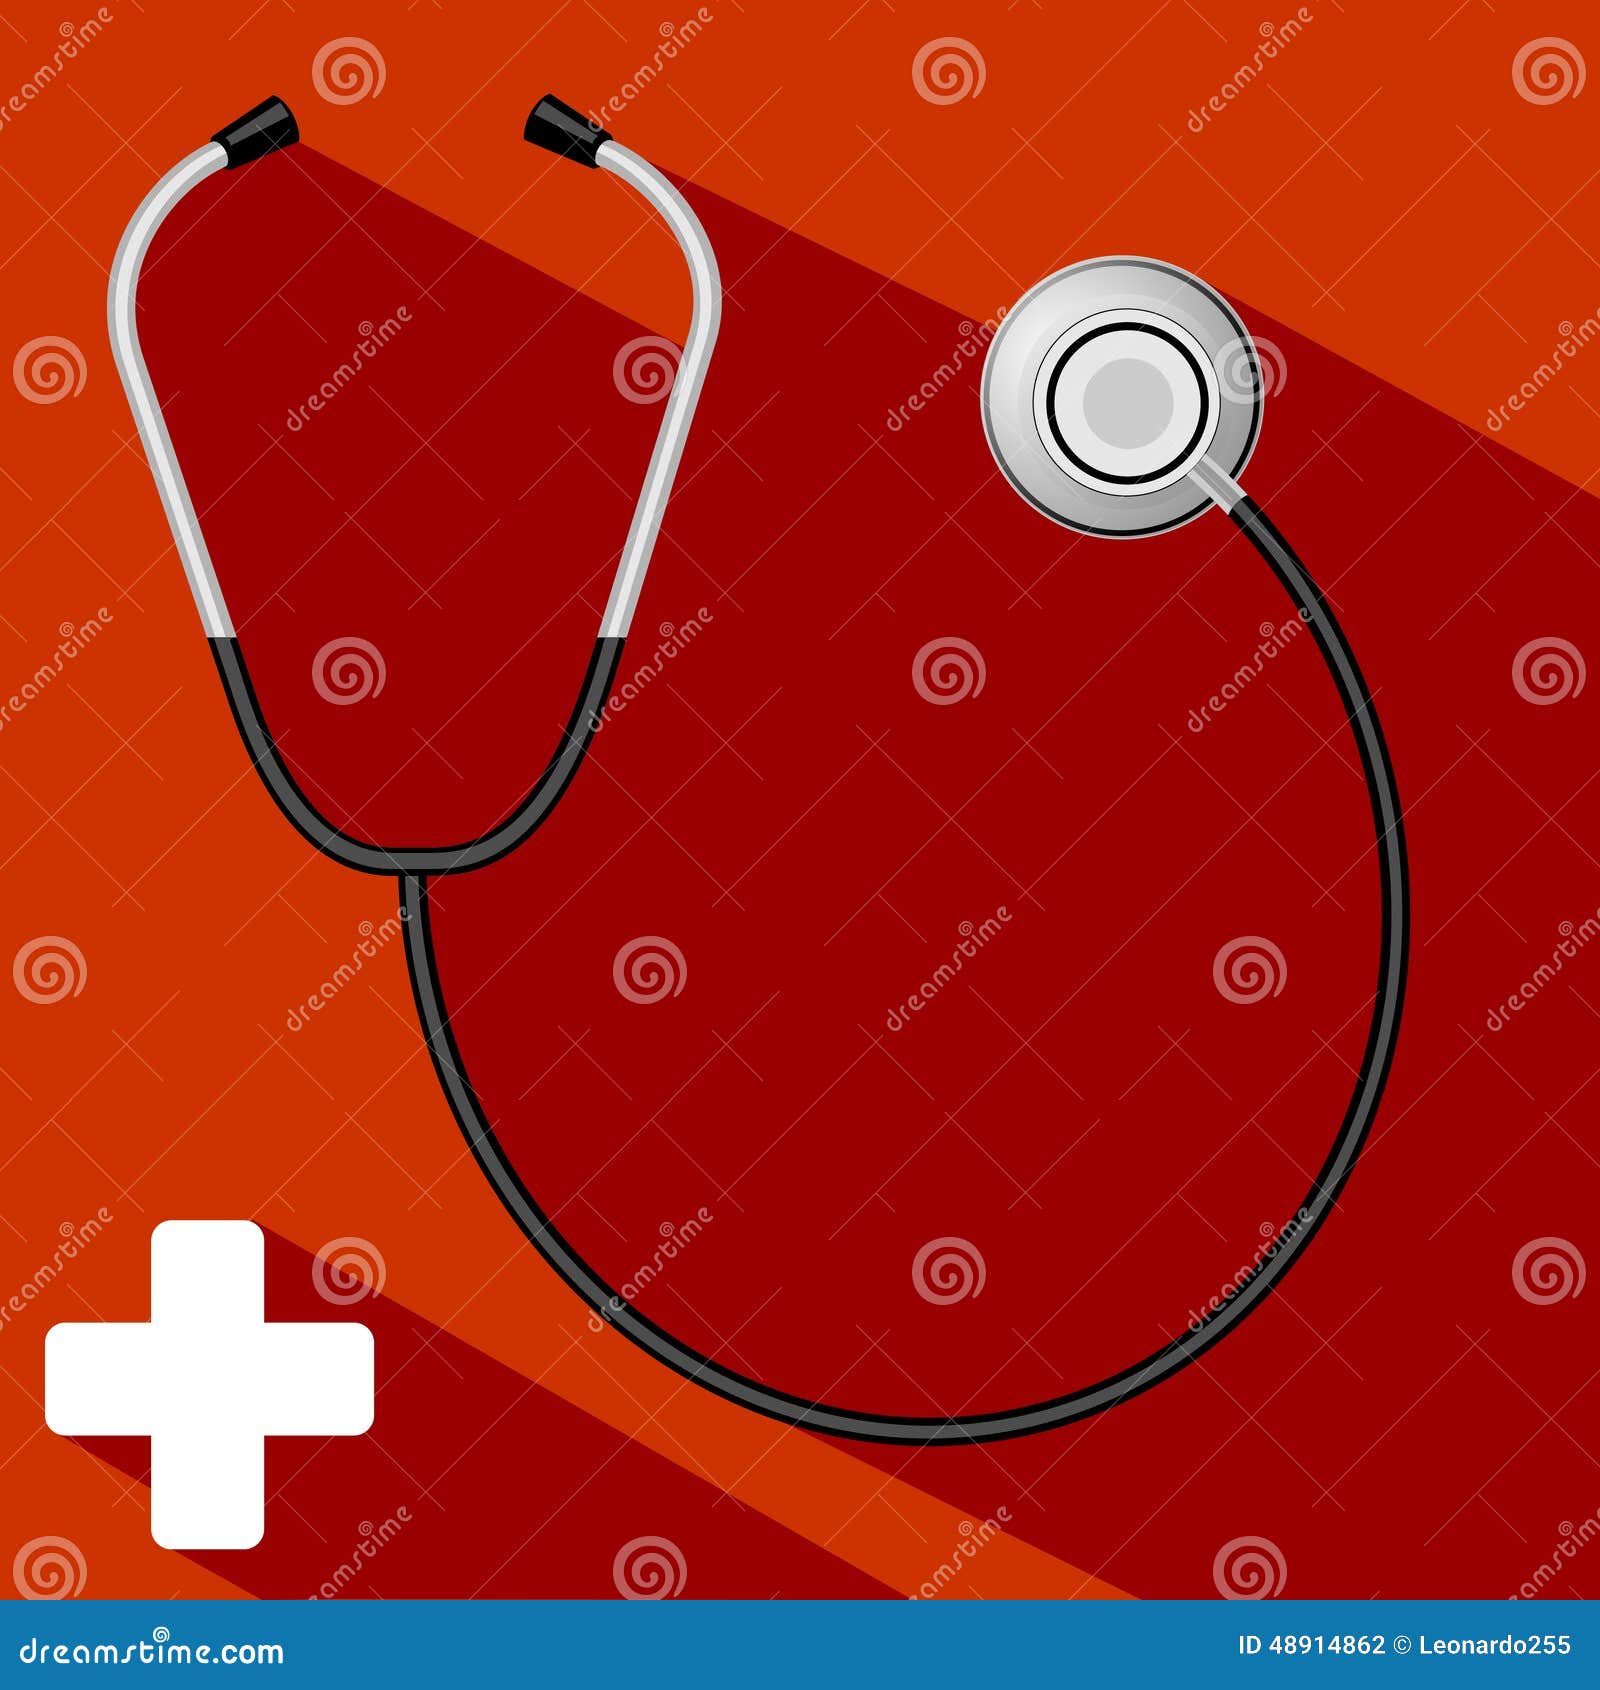 Stethoscope with heart on red background illustration